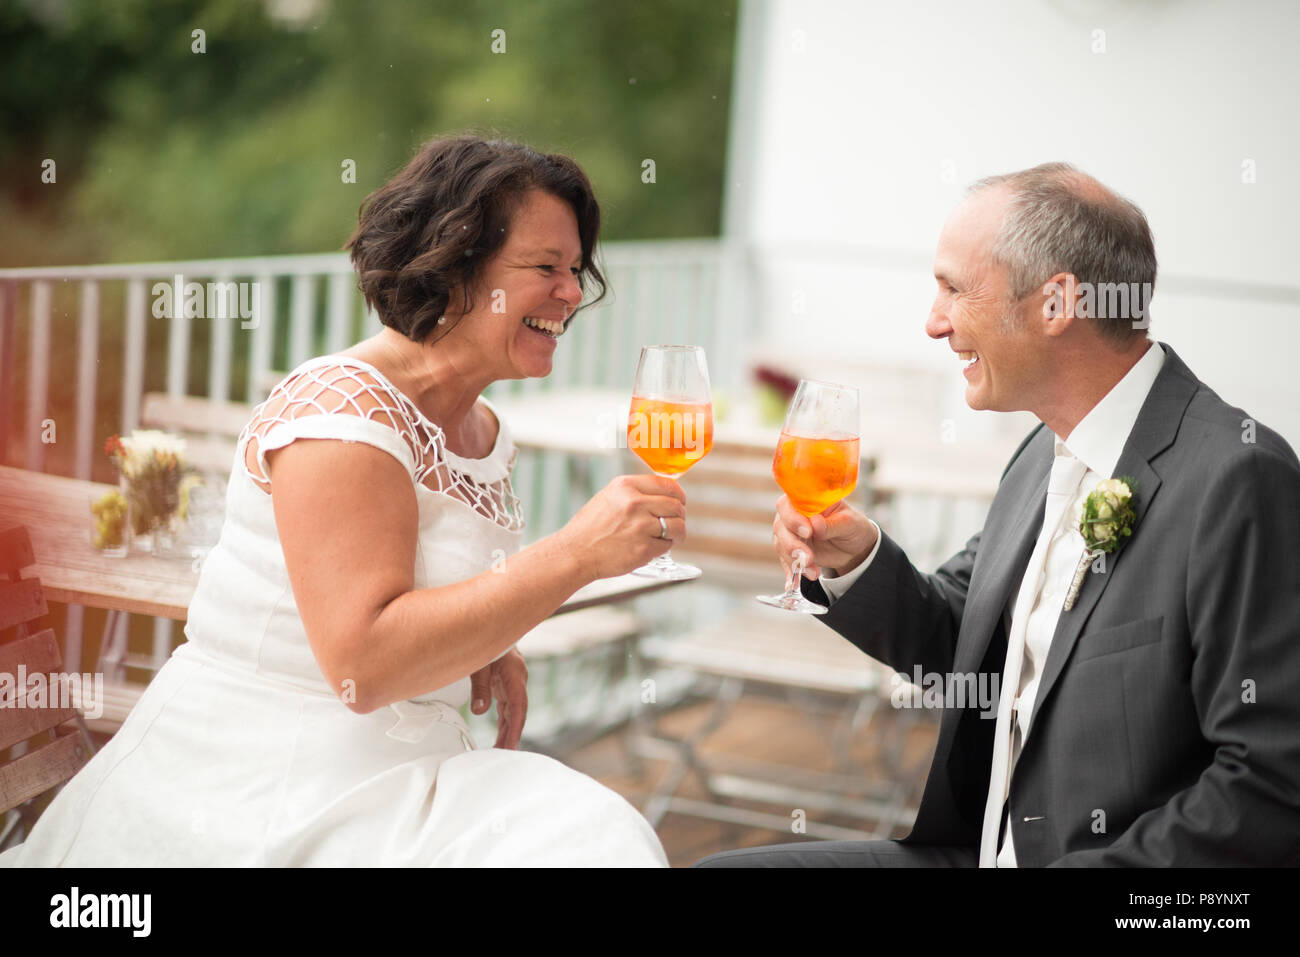 Old aged elderly marriage couple on  Wedding day old bride and groom bridegroom aged love marriage old marrying couple Stock Photo